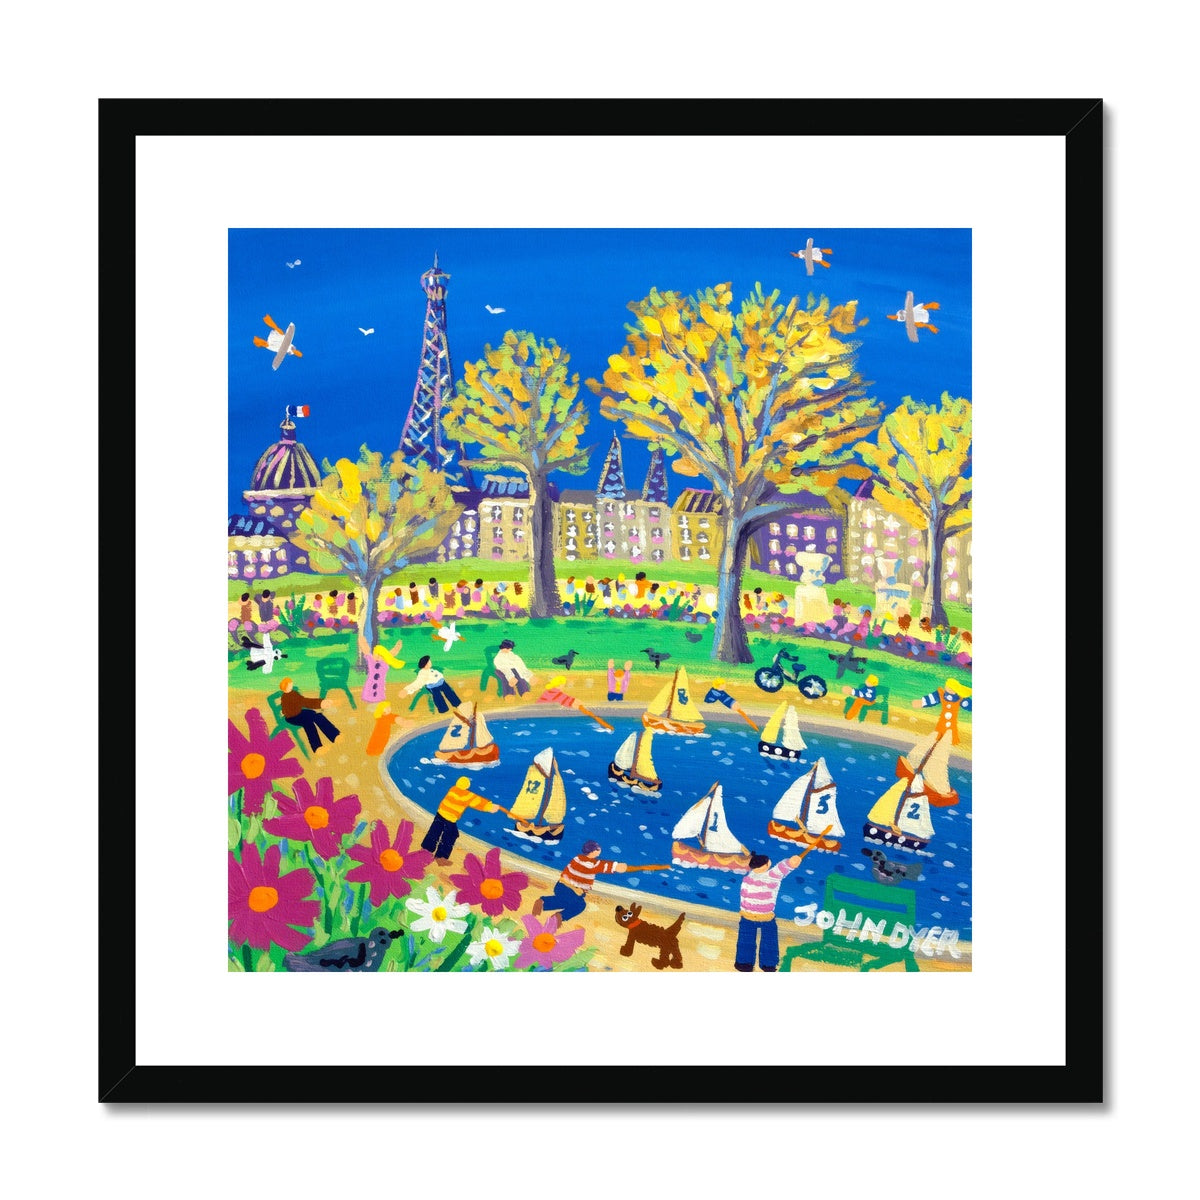 John Dyer Framed Open Edition City Fine Art Print. &#39;Sunday Afternoon in the Park, Paris, France&#39;. French Art Gallery